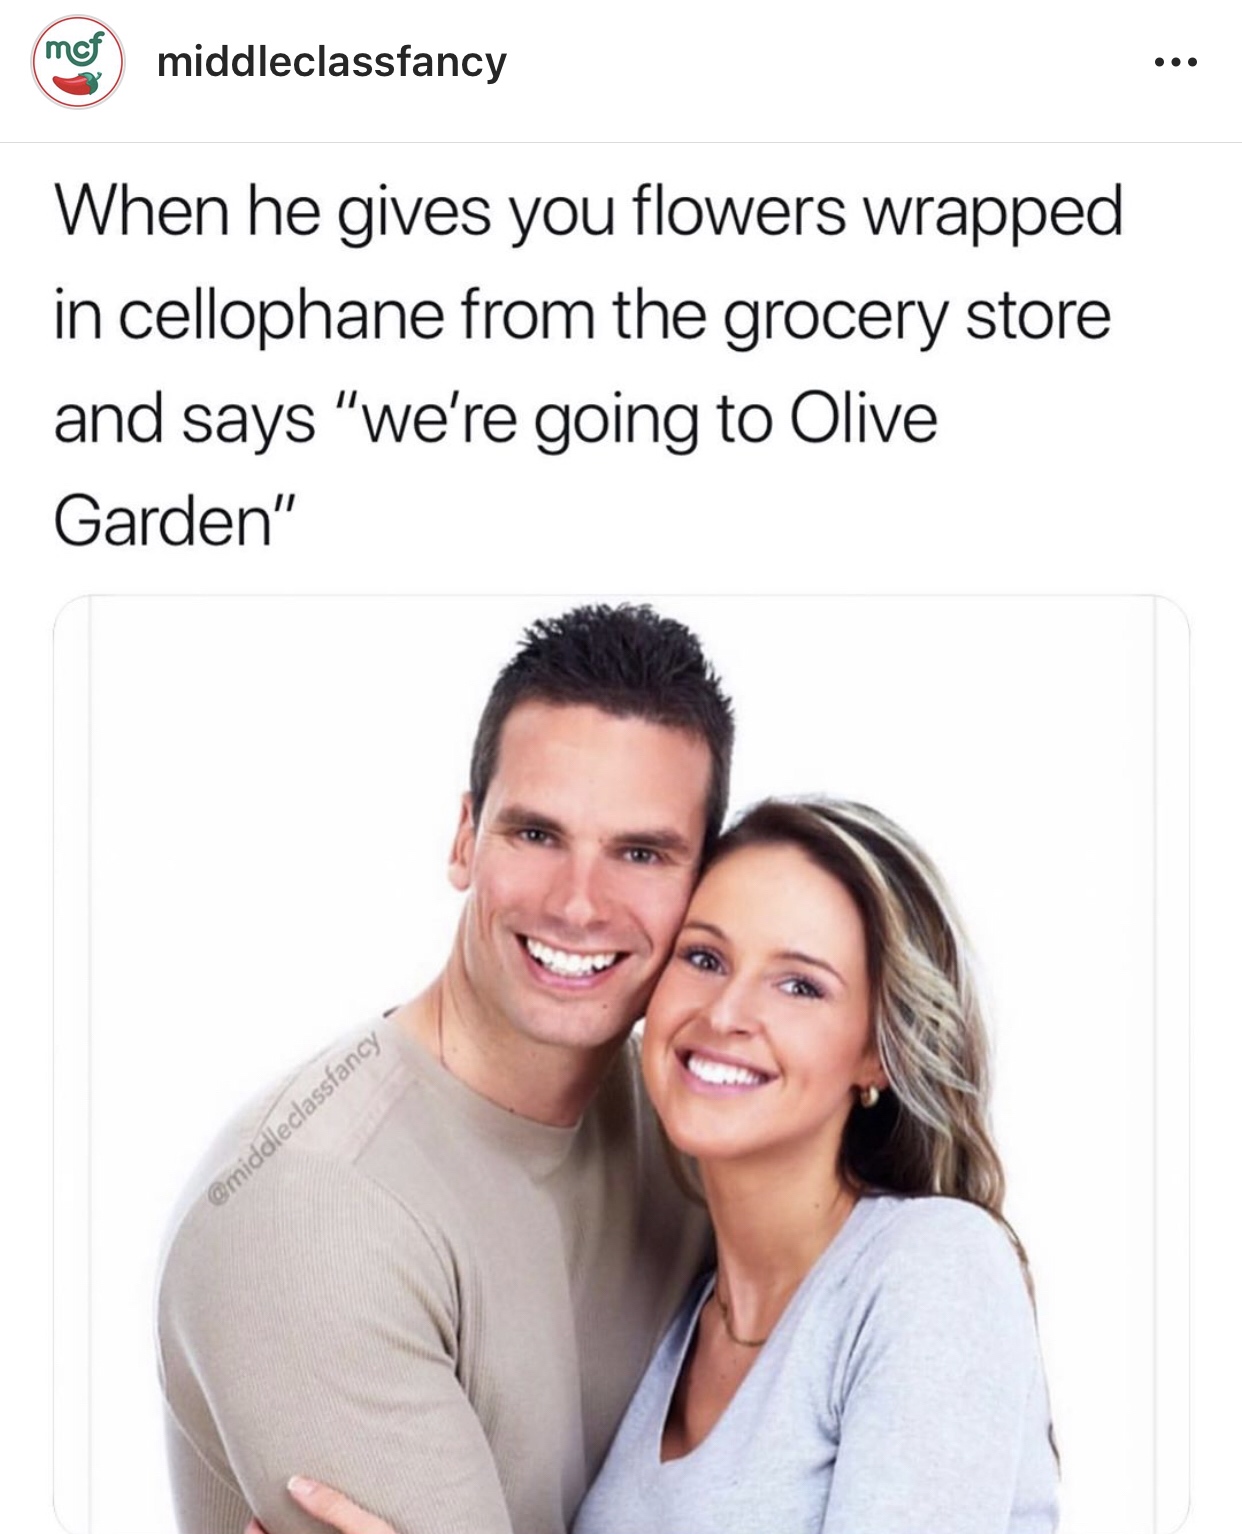 rand and nance - mos middleclassfancy When he gives you flowers wrapped in cellophane from the grocery store and says "we're going to Olive Garden"